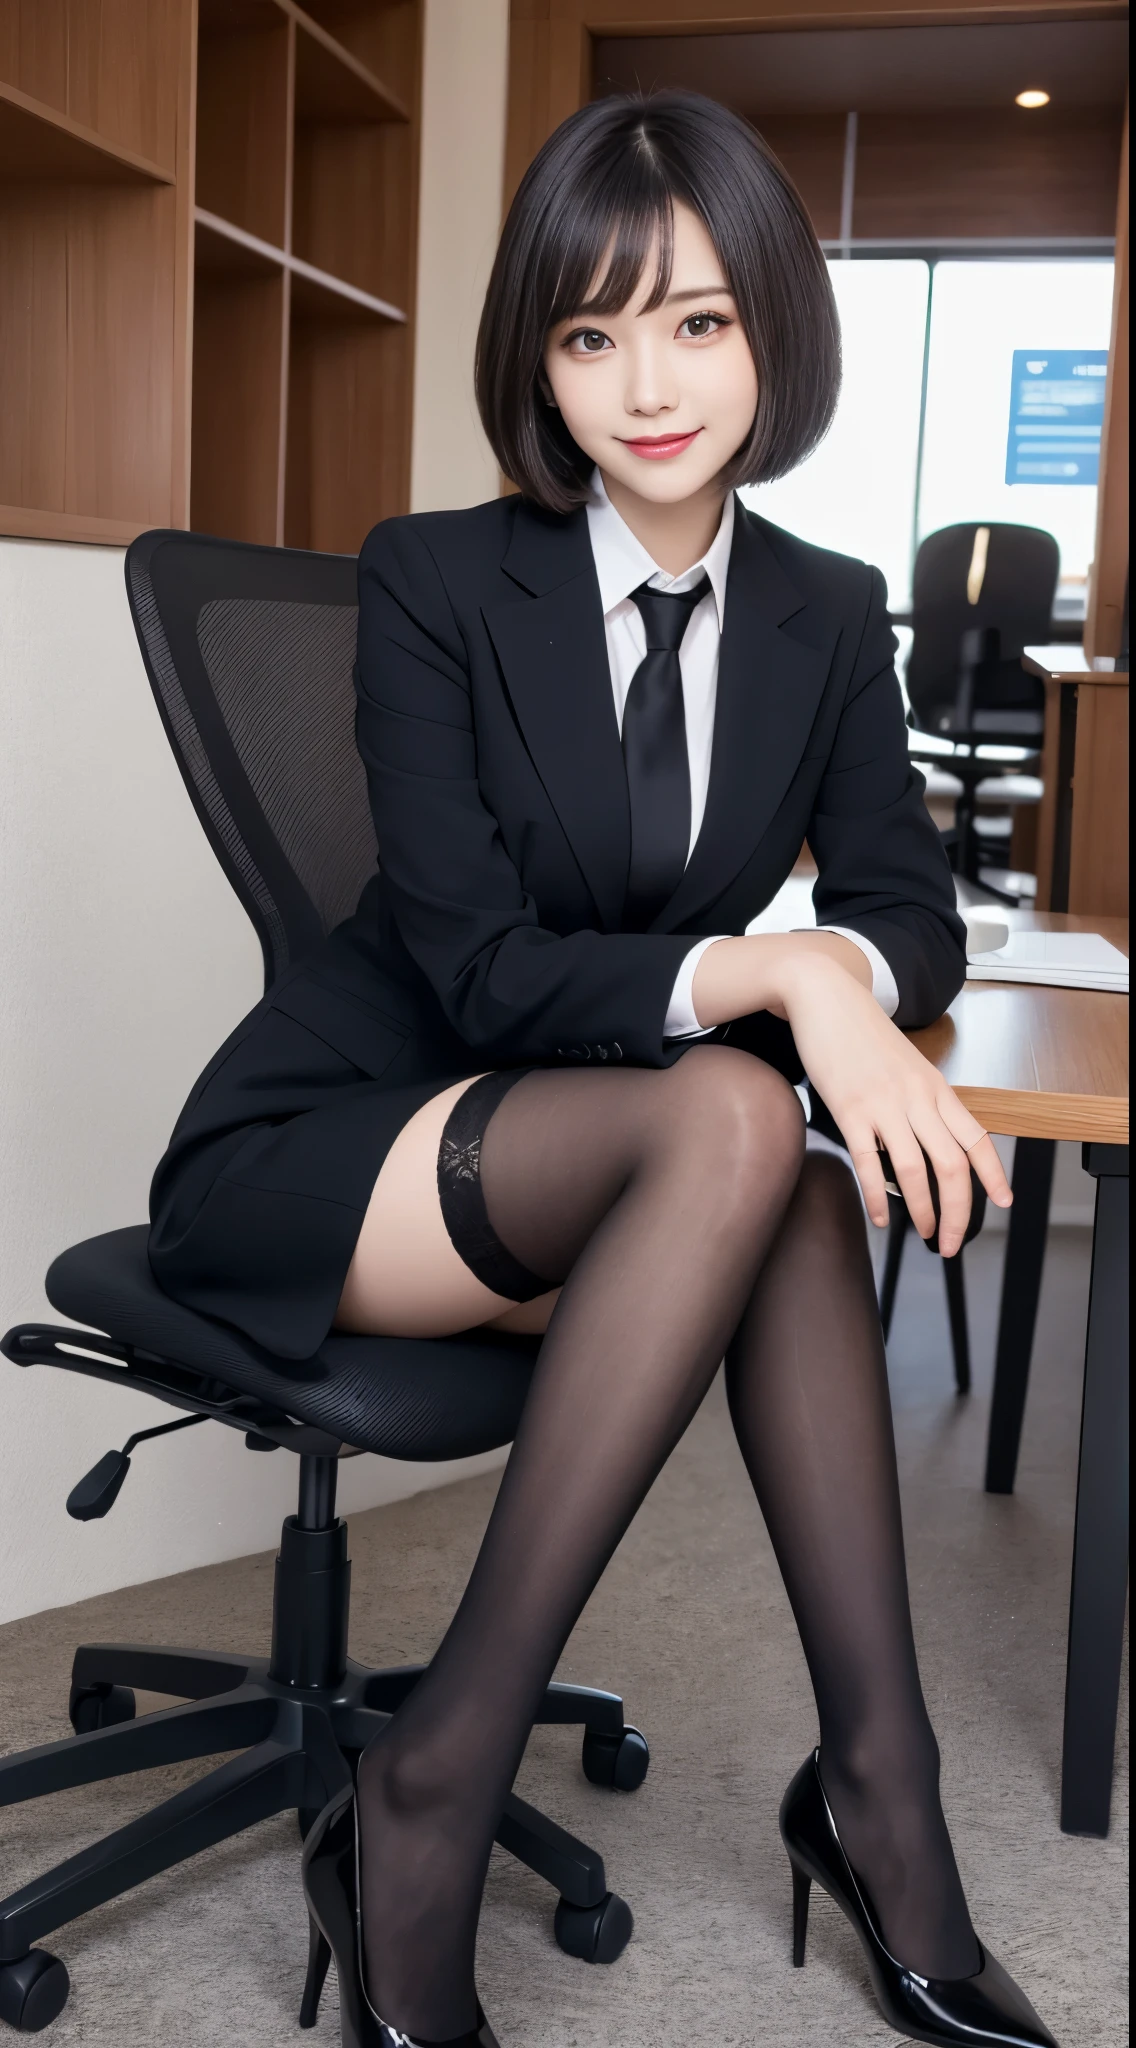 masutepiece, Best Quality, Illustration, Ultra-detailed, finely detail, hight resolution, 8K Wallpaper, Perfect dynamic composition, Beautiful detailed eyes, Business suits,hort cut hair，Natural Color Lip, Sit on a chair and cross your legs,Smile、25 year old girl，red eye shadow，Wearing black tights stockings，